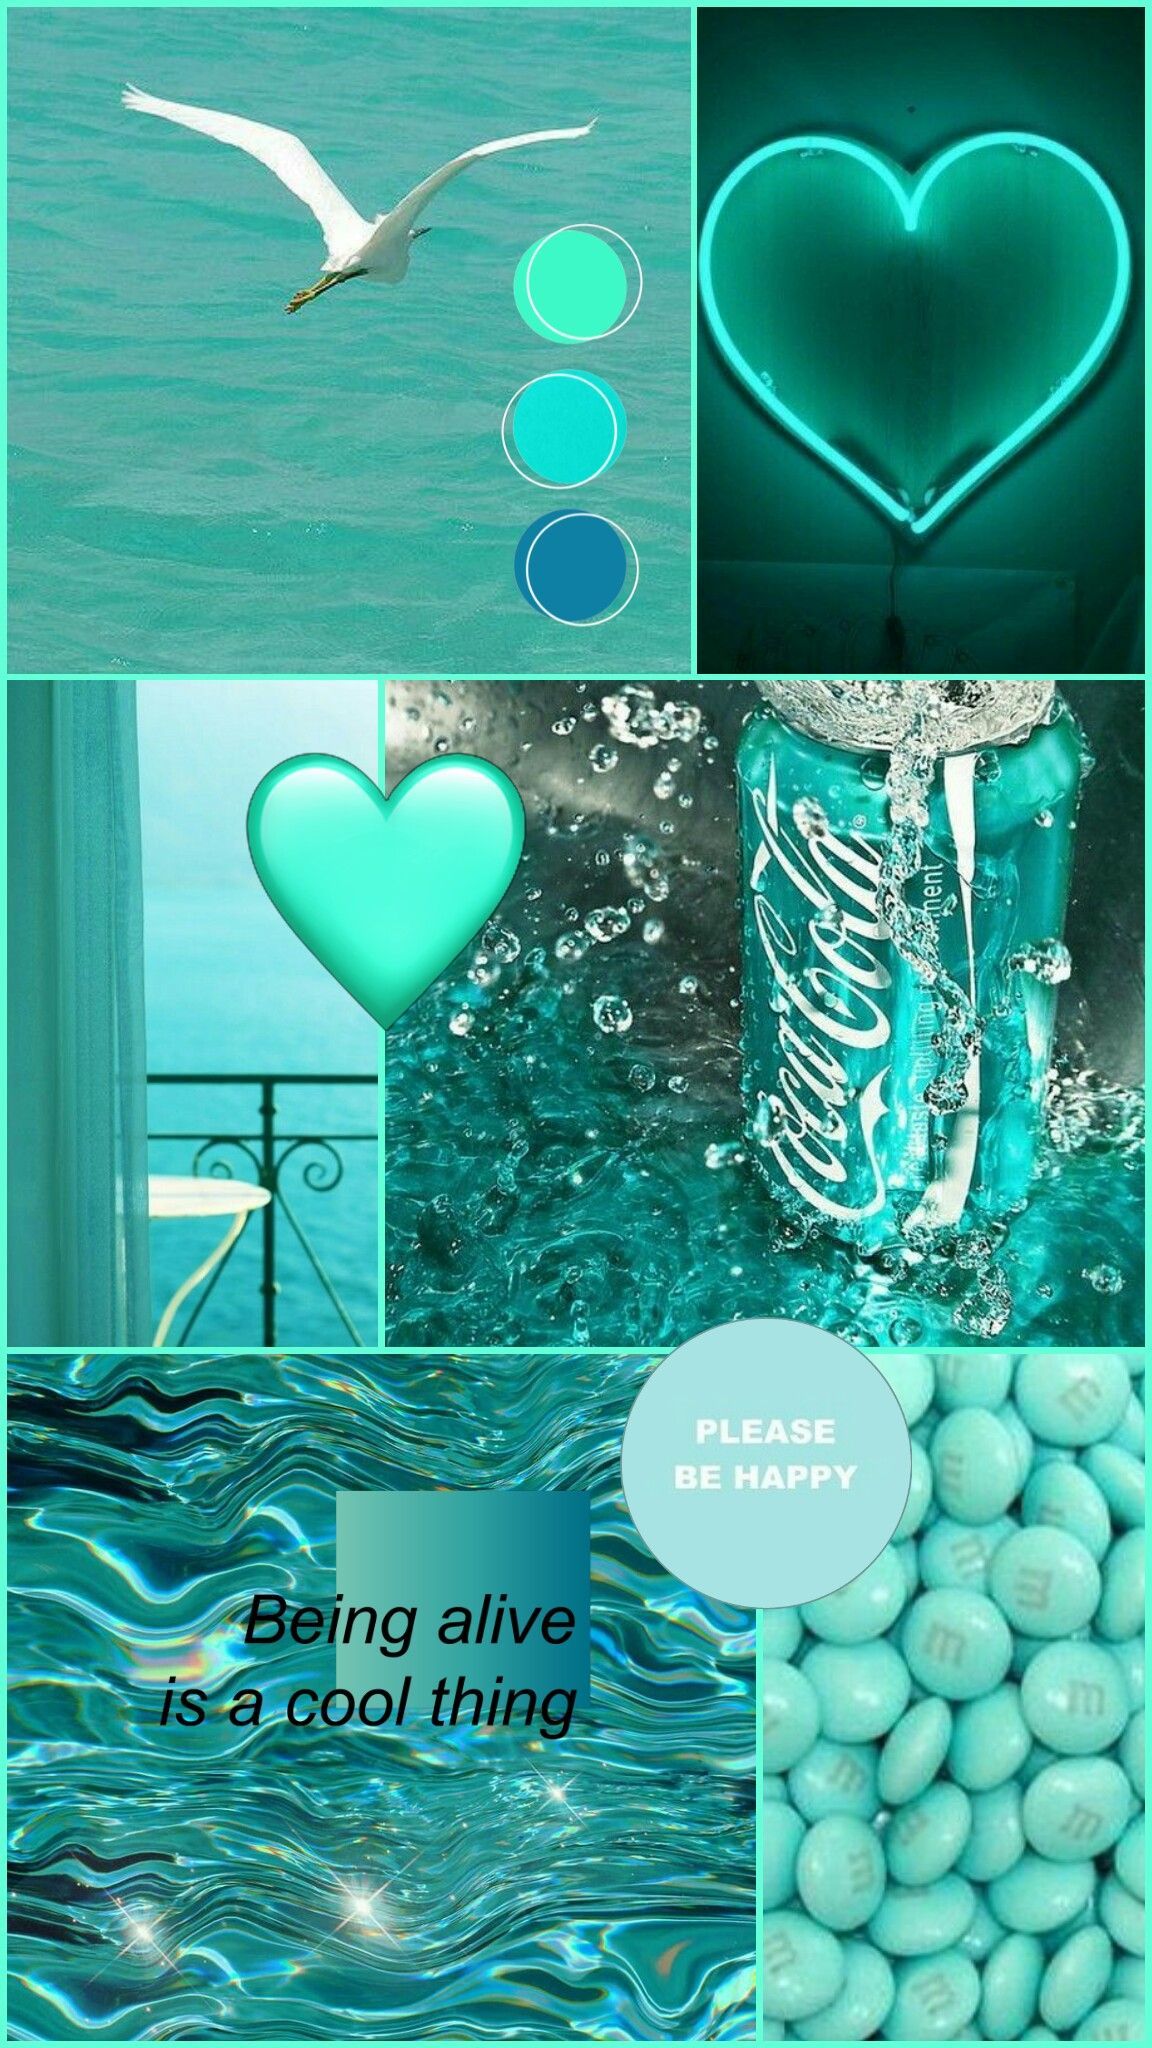 Teal Aesthetic Wallpaper - Image result for teal aesthetic on We Heart